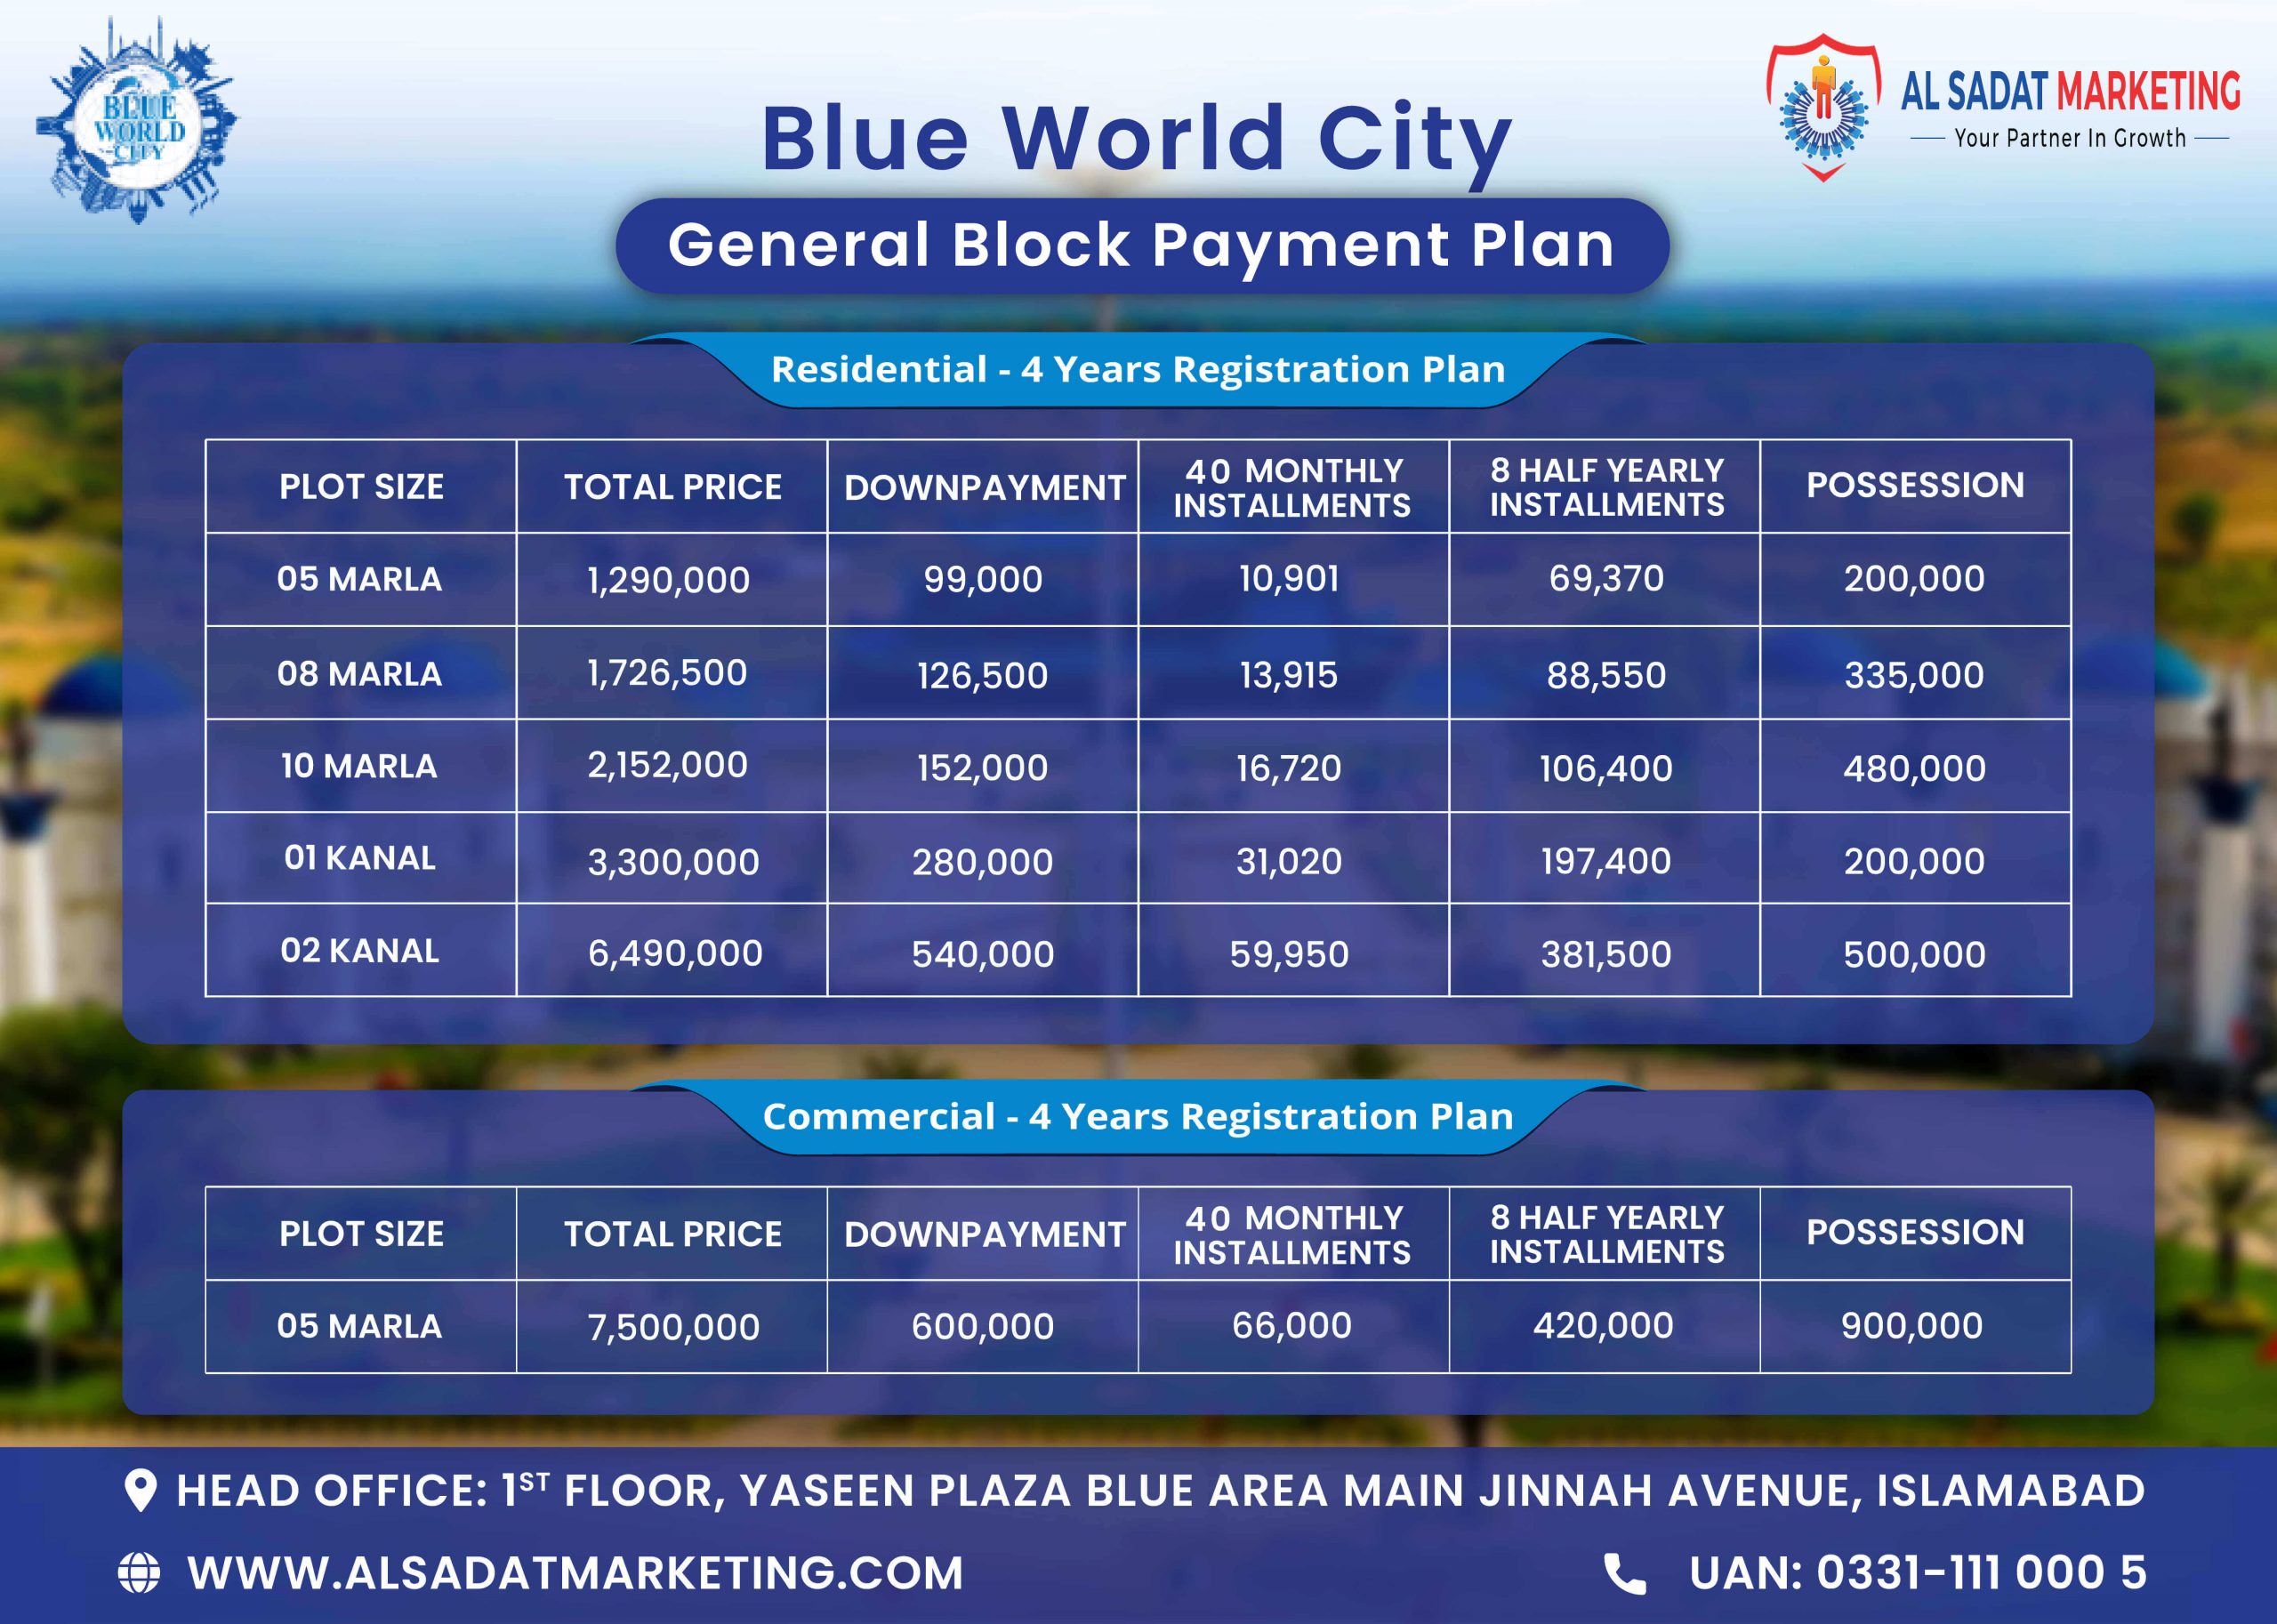 blue world city residential plots payment plan – blue world city islamabad residential plots payment plan – blue world city rawalpindi residential plots payment plan – blue world city general block payment plan – blue world city islamabad general block payment plan – blue world city rawalpindi general block payment plan – blue world city payment plan – blue world city islamabad payment plan - blue world city rawalpindi payment plan – blue world city– blue world city islamabad – blue world city rawalpindi– blue world city housing society – blue world city islamabad housing society – blue world city real estate project – blue world city islamabad real estate project - al sadat marketing - alsadat marketing - al-sadat marketing